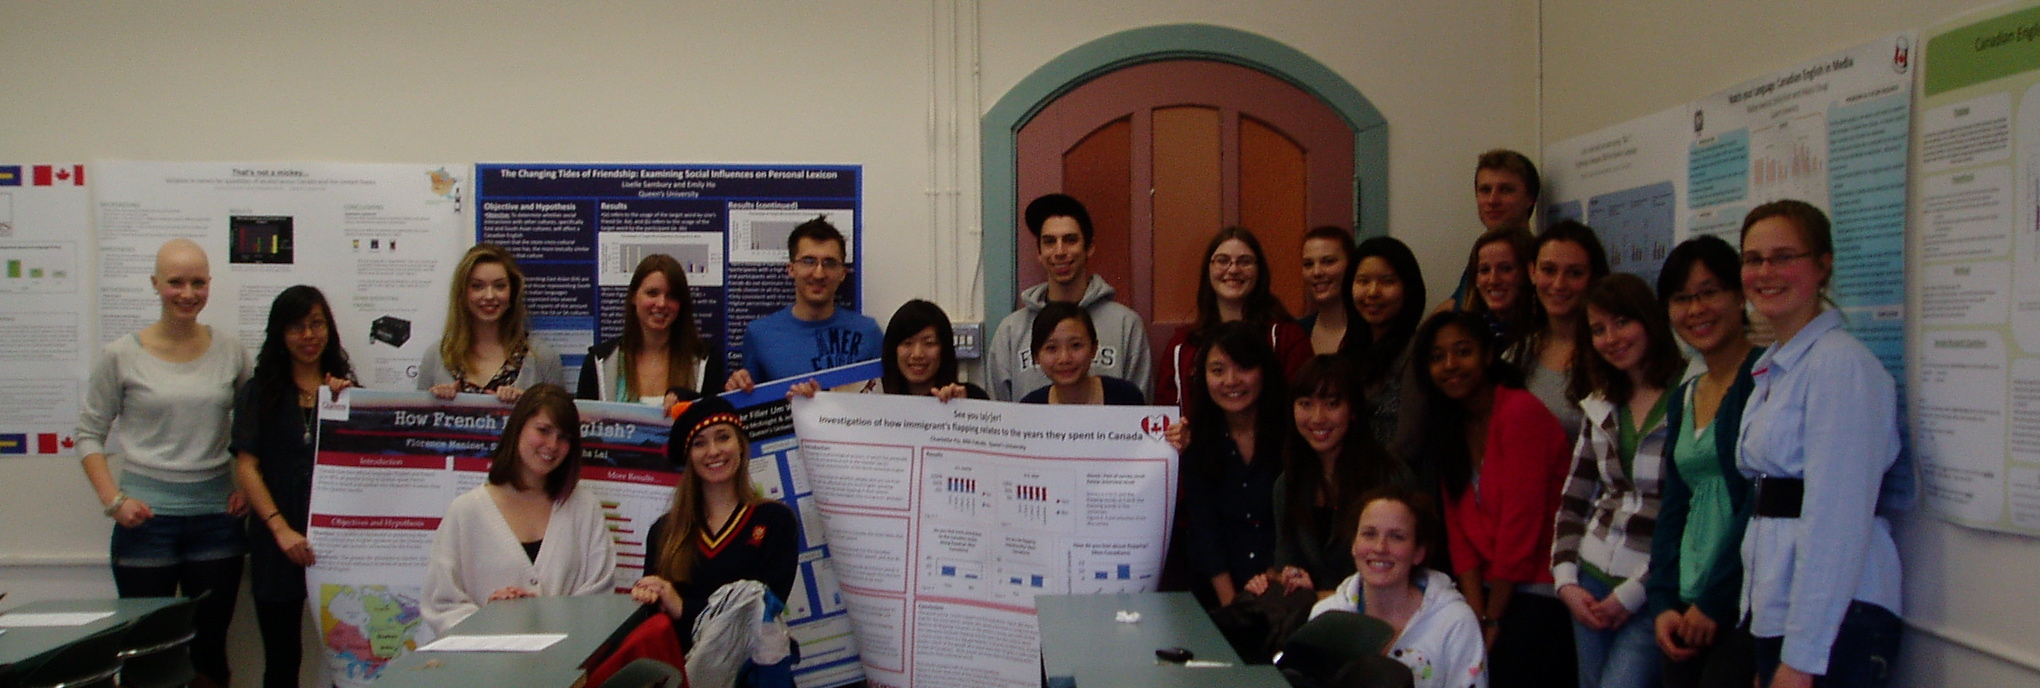 Canadian English class - students with research posters